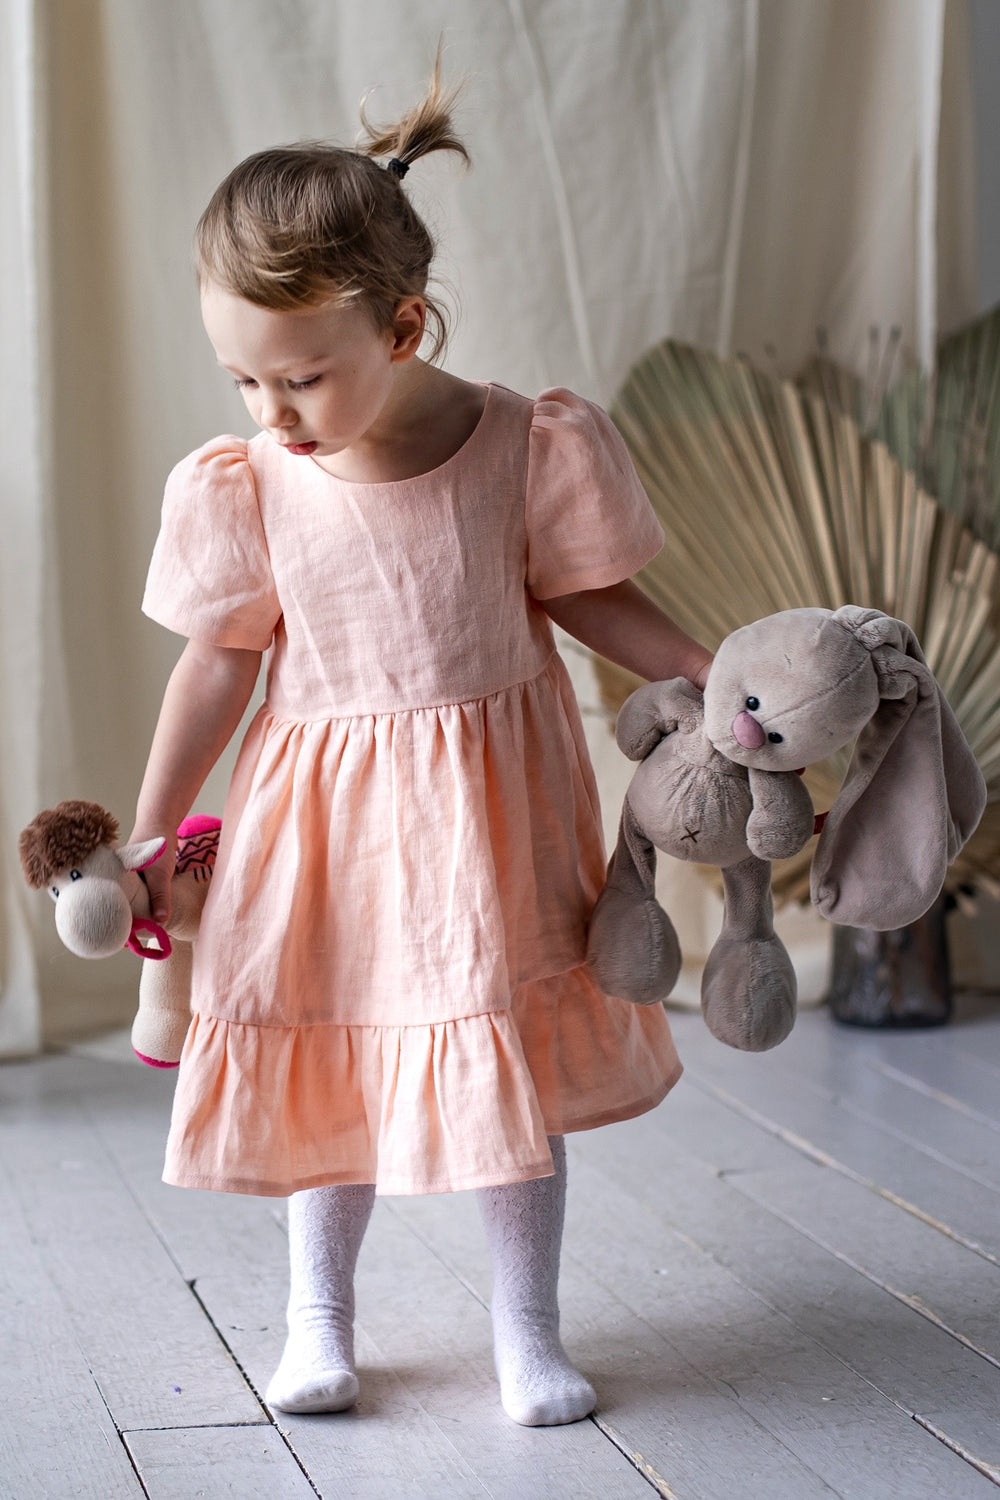 Child wearing the Children's Little Naya Dress sewing pattern from Kate’s Sewing Patterns on The Fold Line. A dress pattern made in cotton or linen fabrics, featuring a high waistline, voluminous sleeves with shoulder gathers, gathered skirt with hem ruff